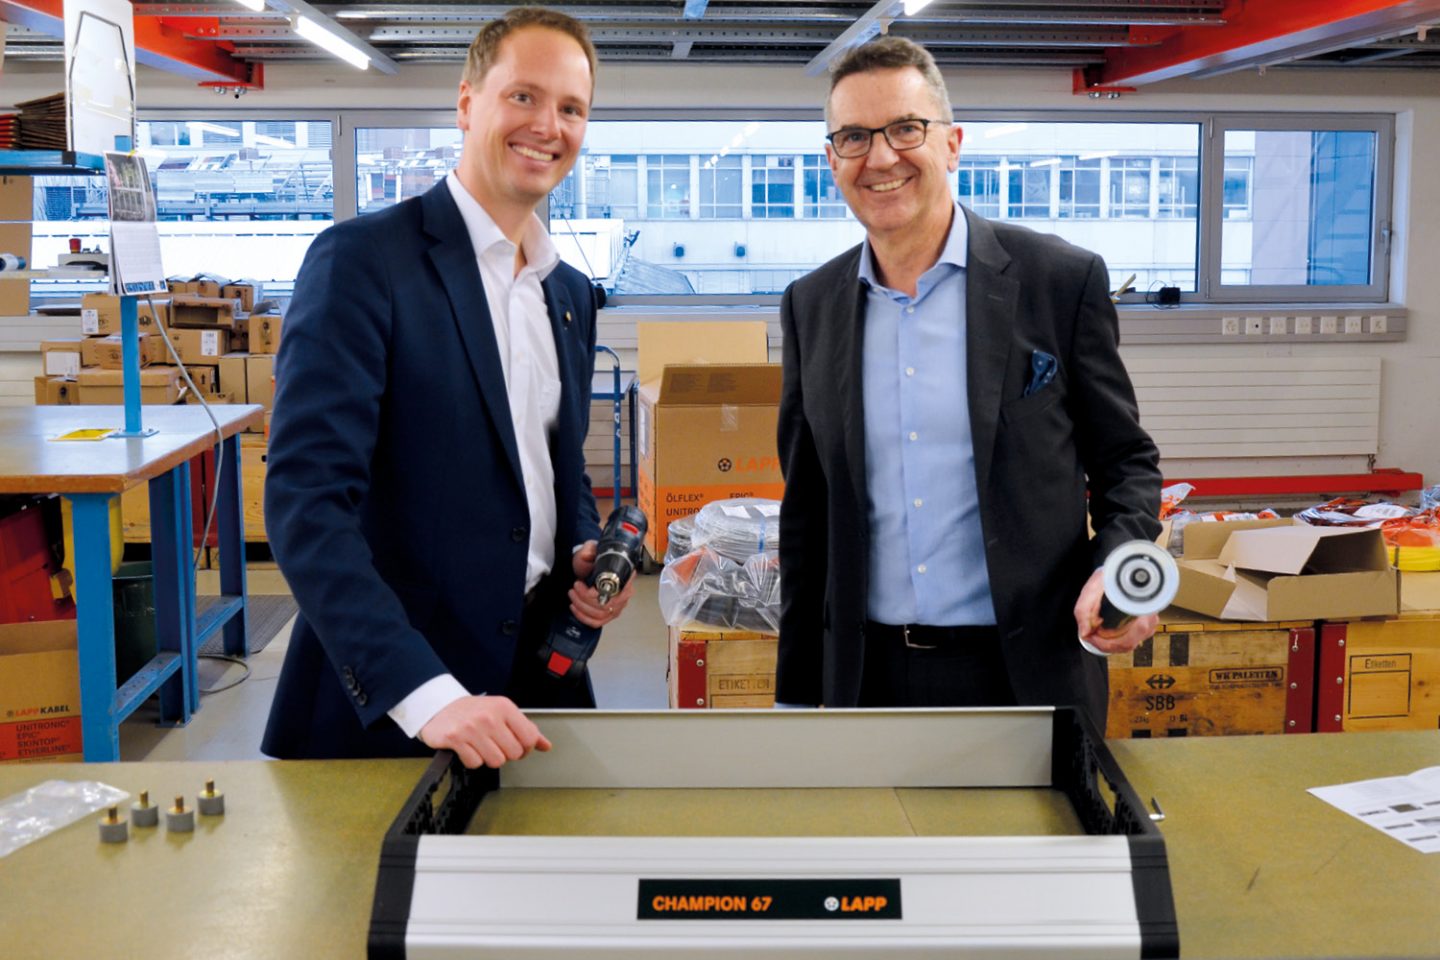 On the picture you can see Matthias Lapp, CEO U.I. Lapp GmbH (left) and Reto Volland, Managing Director Volland AG (right) in front of the LAPP Champion